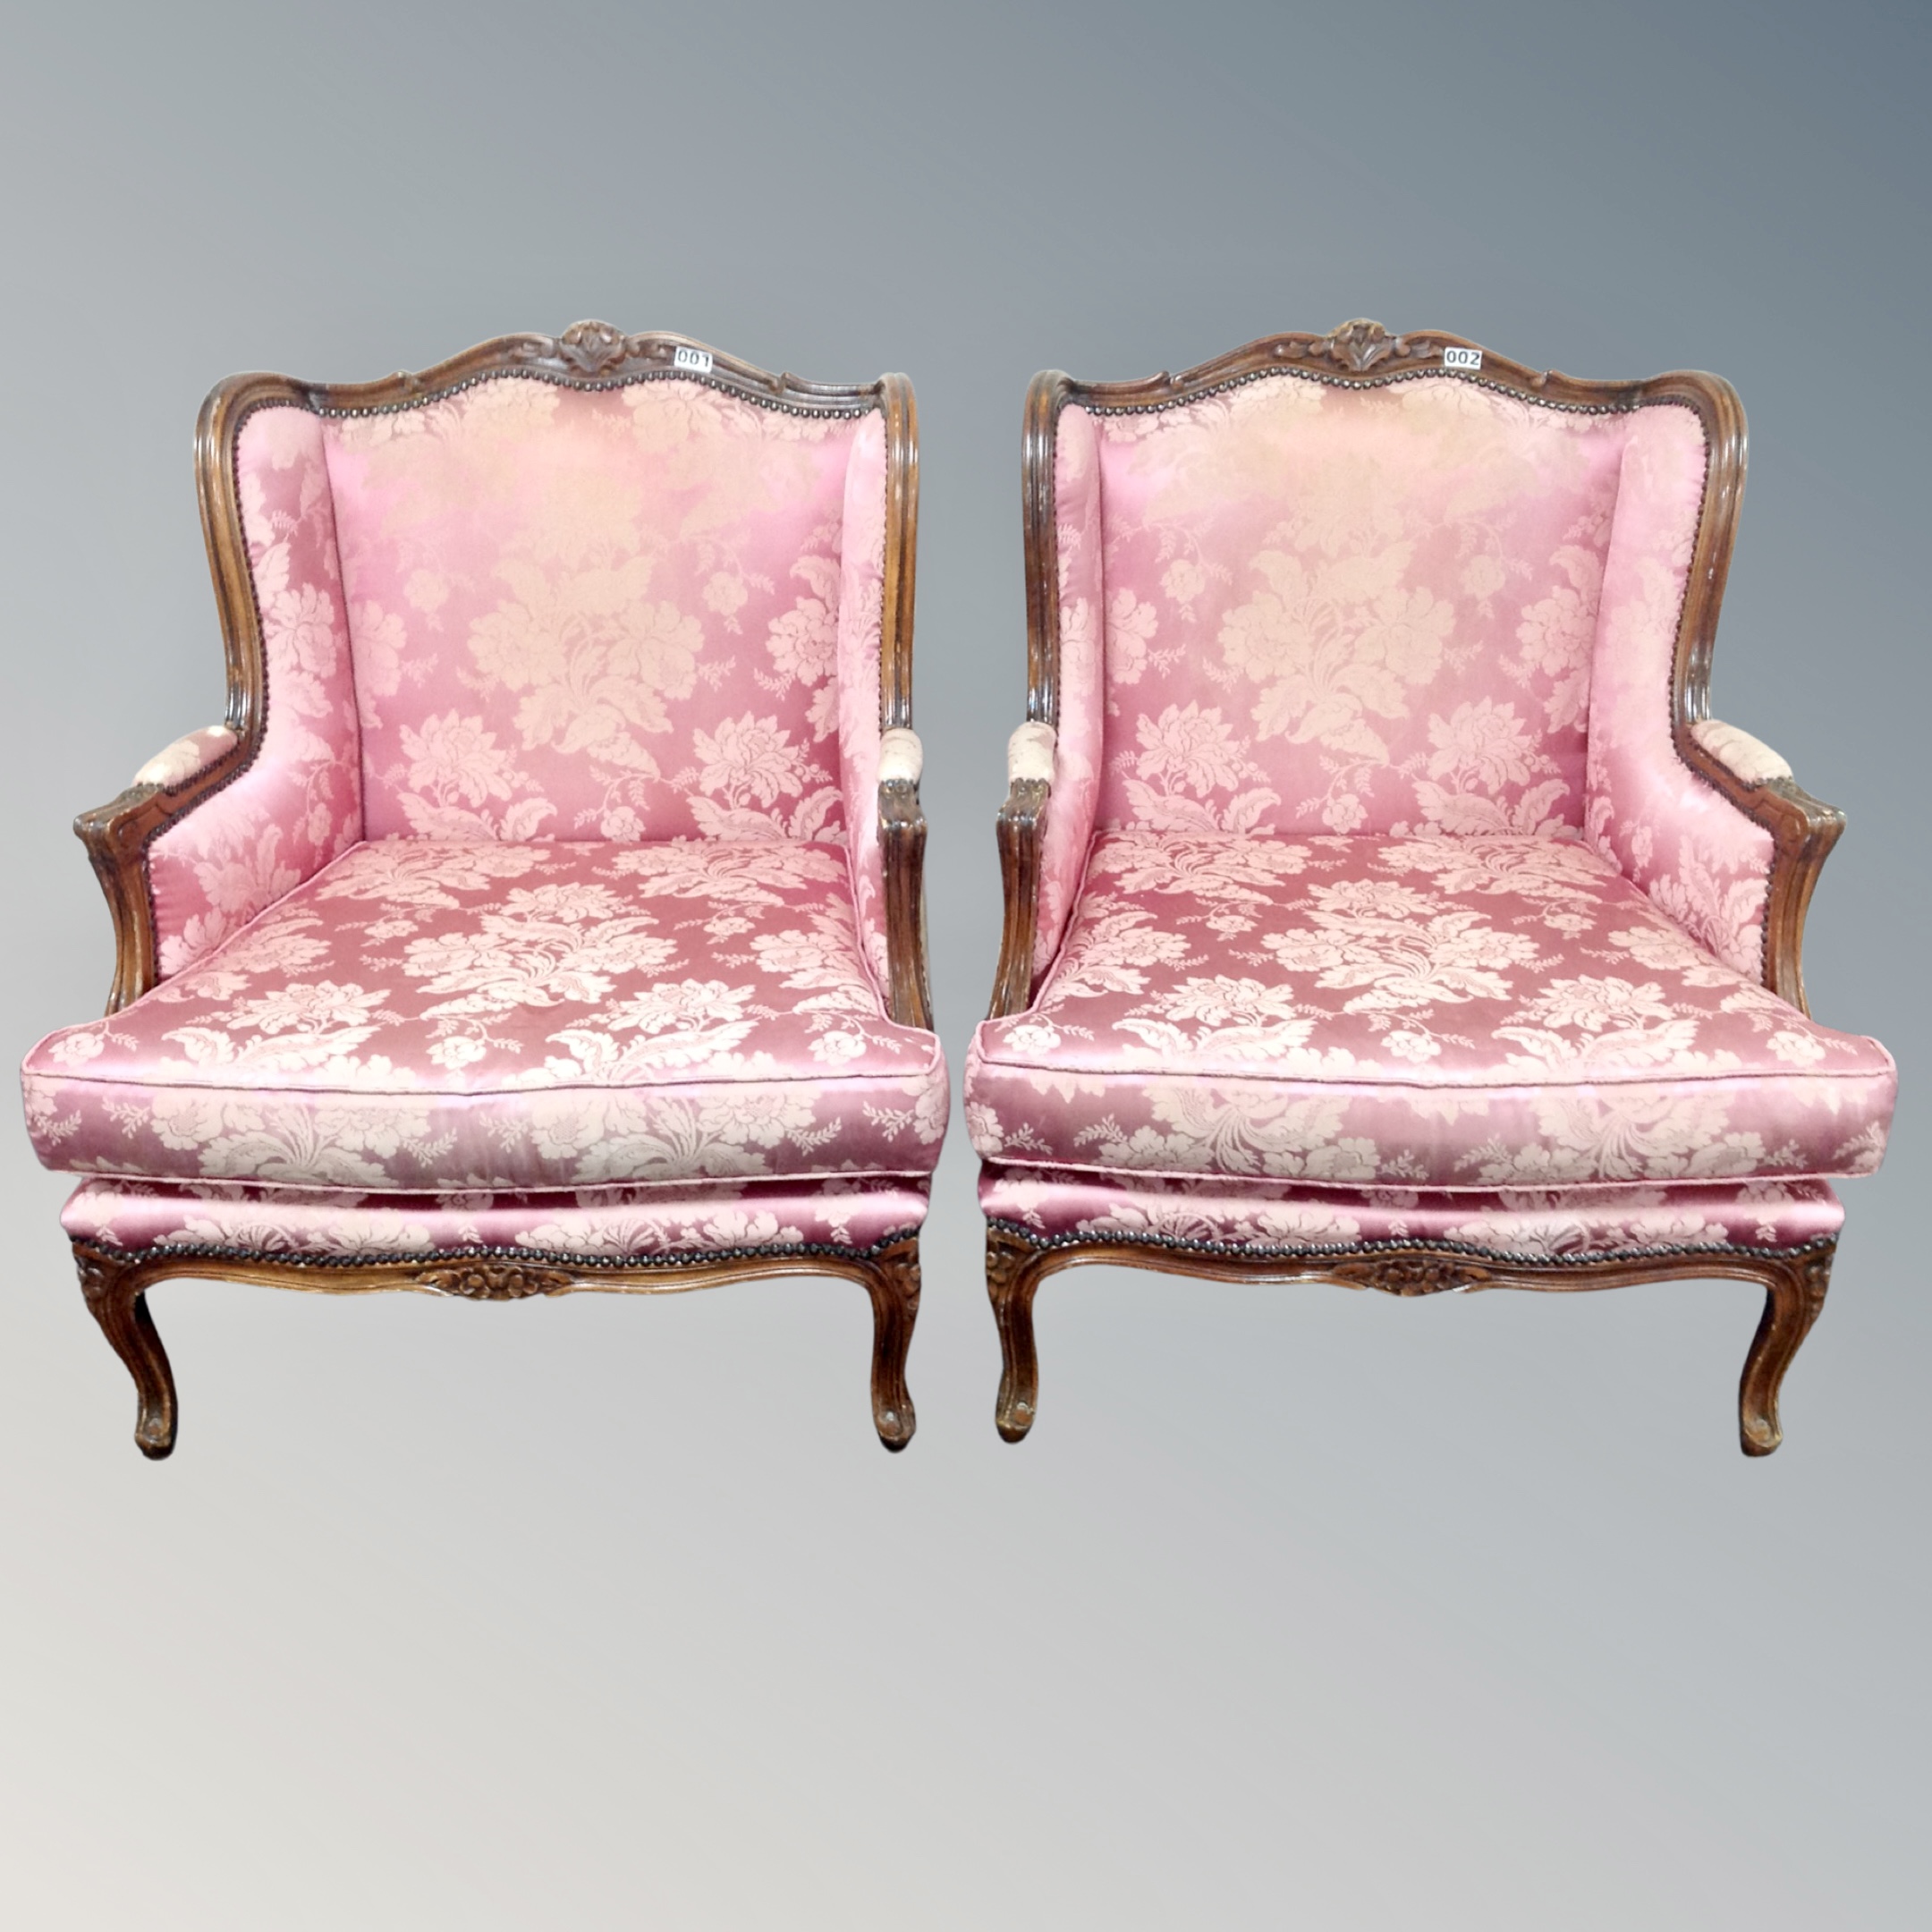 A pair of French style carved beech armchairs in pink floral fabric